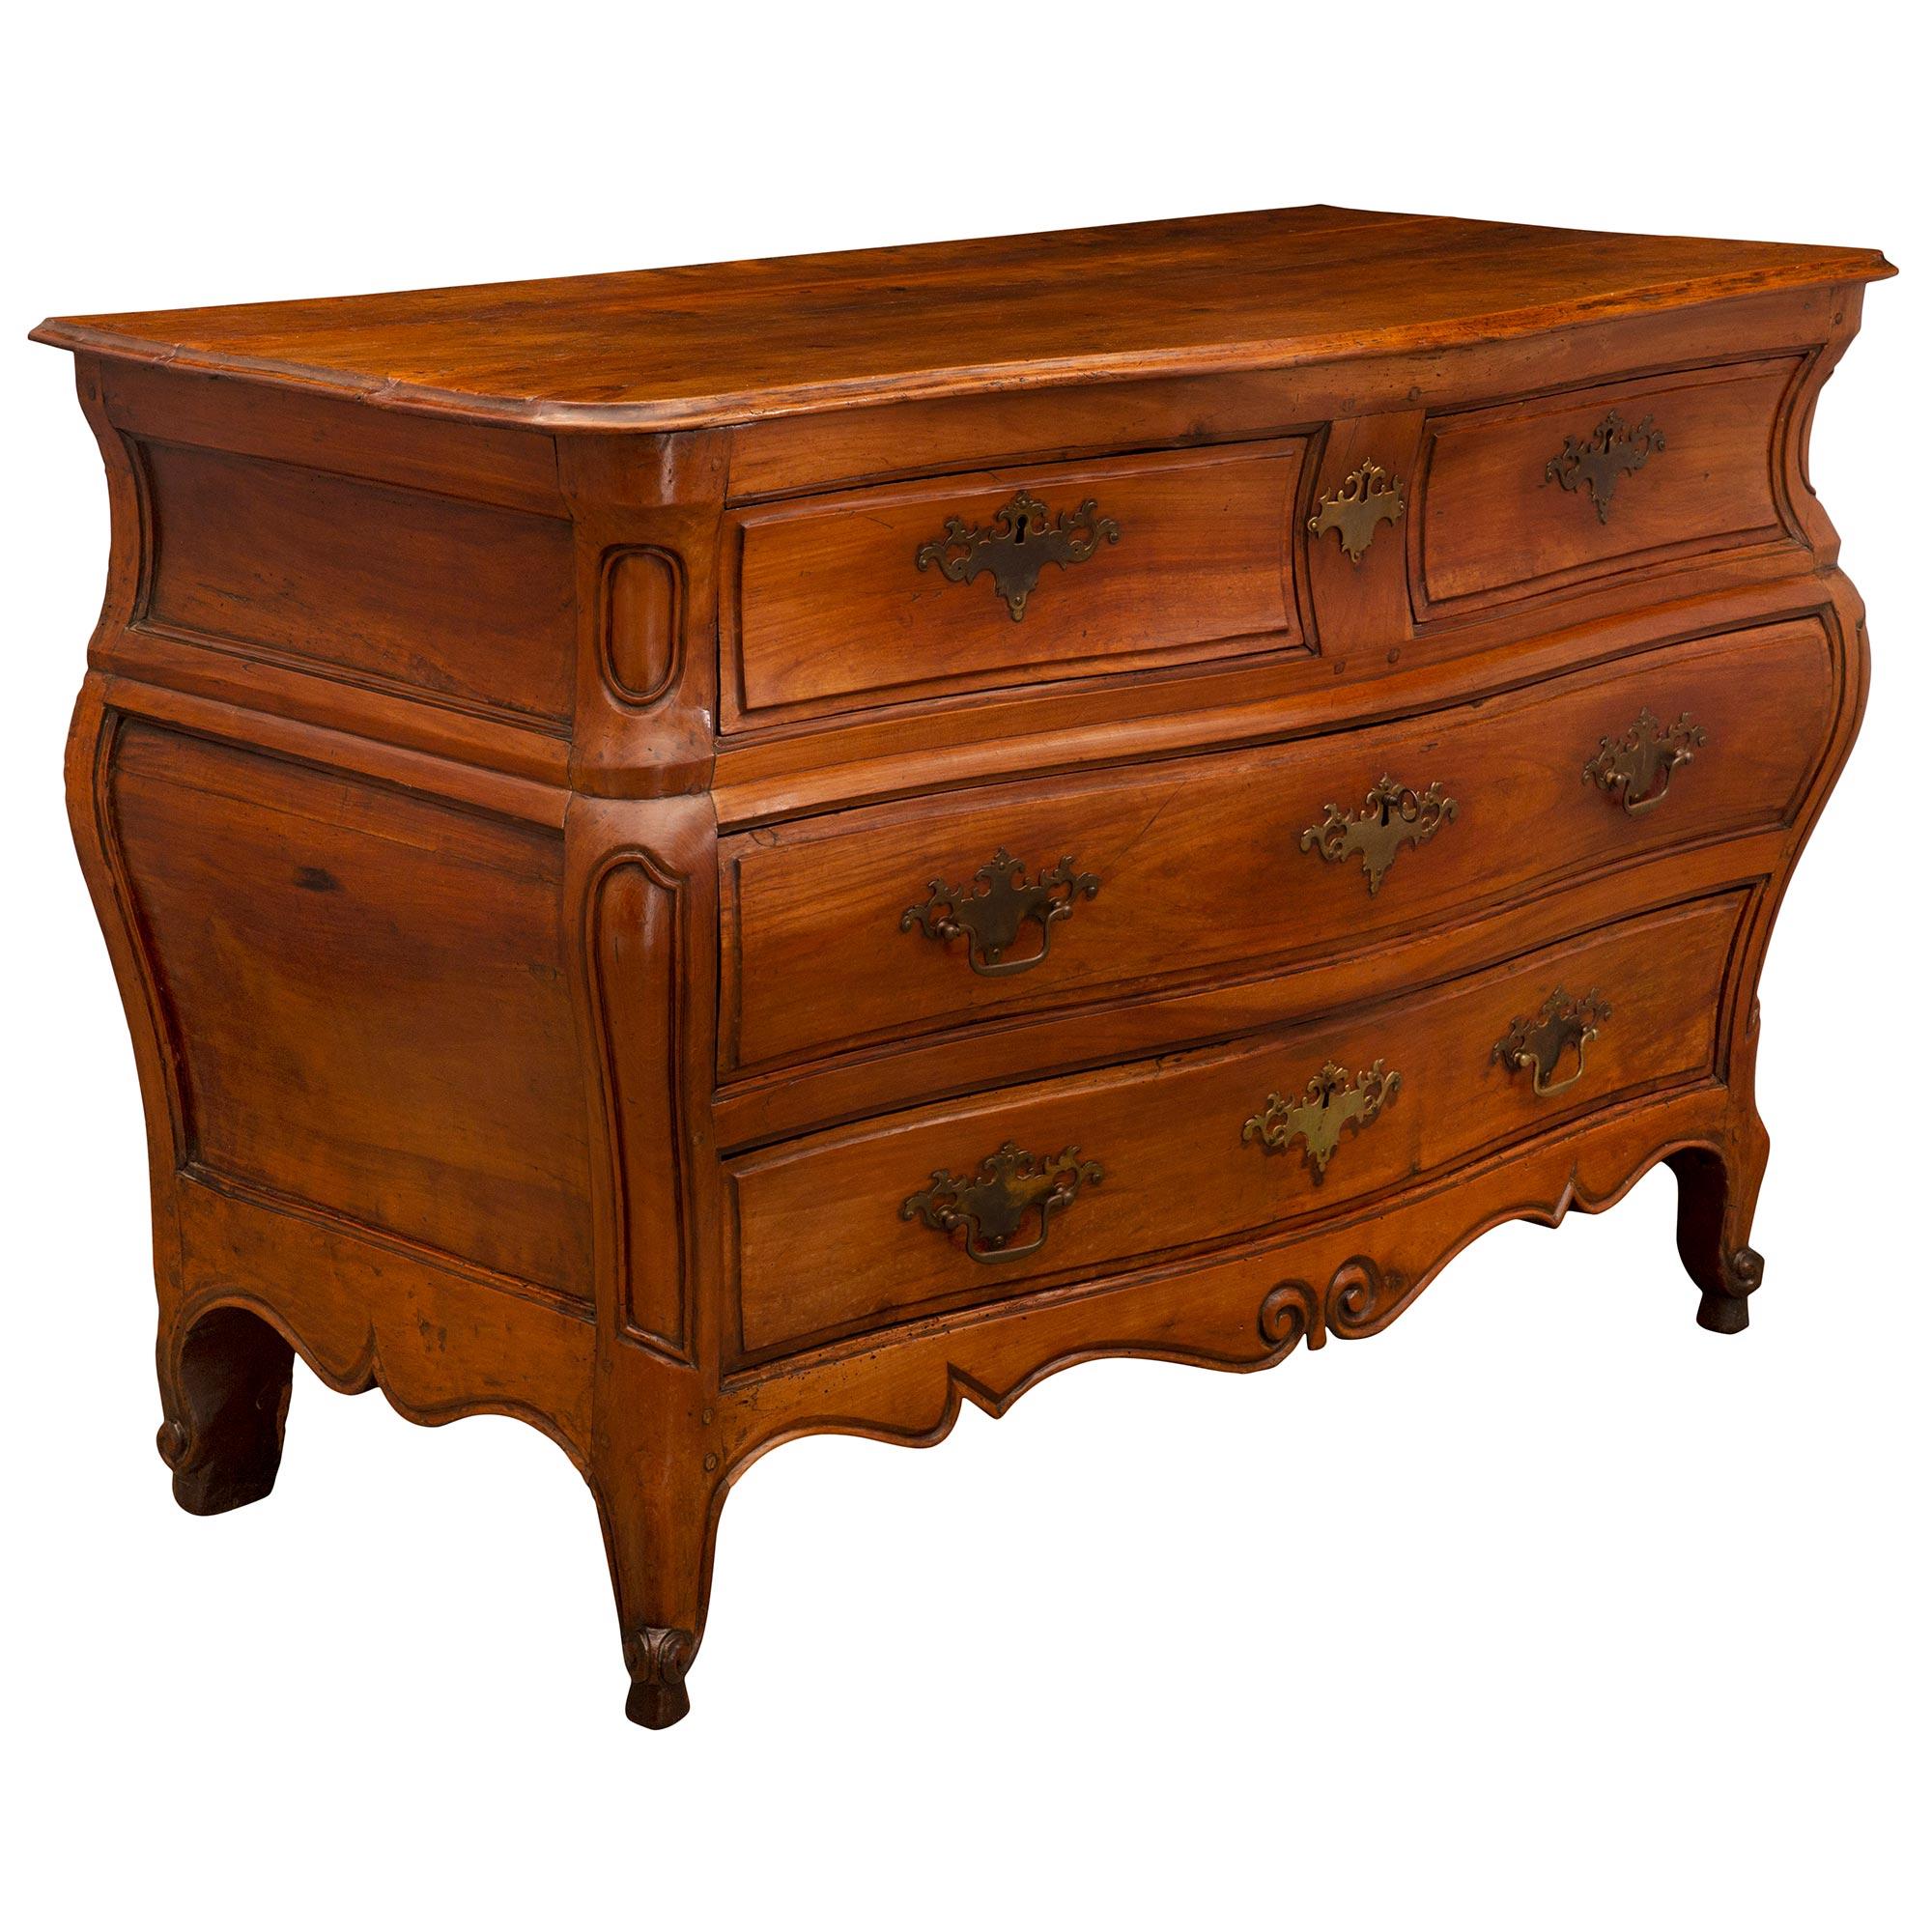 French 18th Century Louis XV Period Walnut Commode Bordelaise In Good Condition For Sale In West Palm Beach, FL